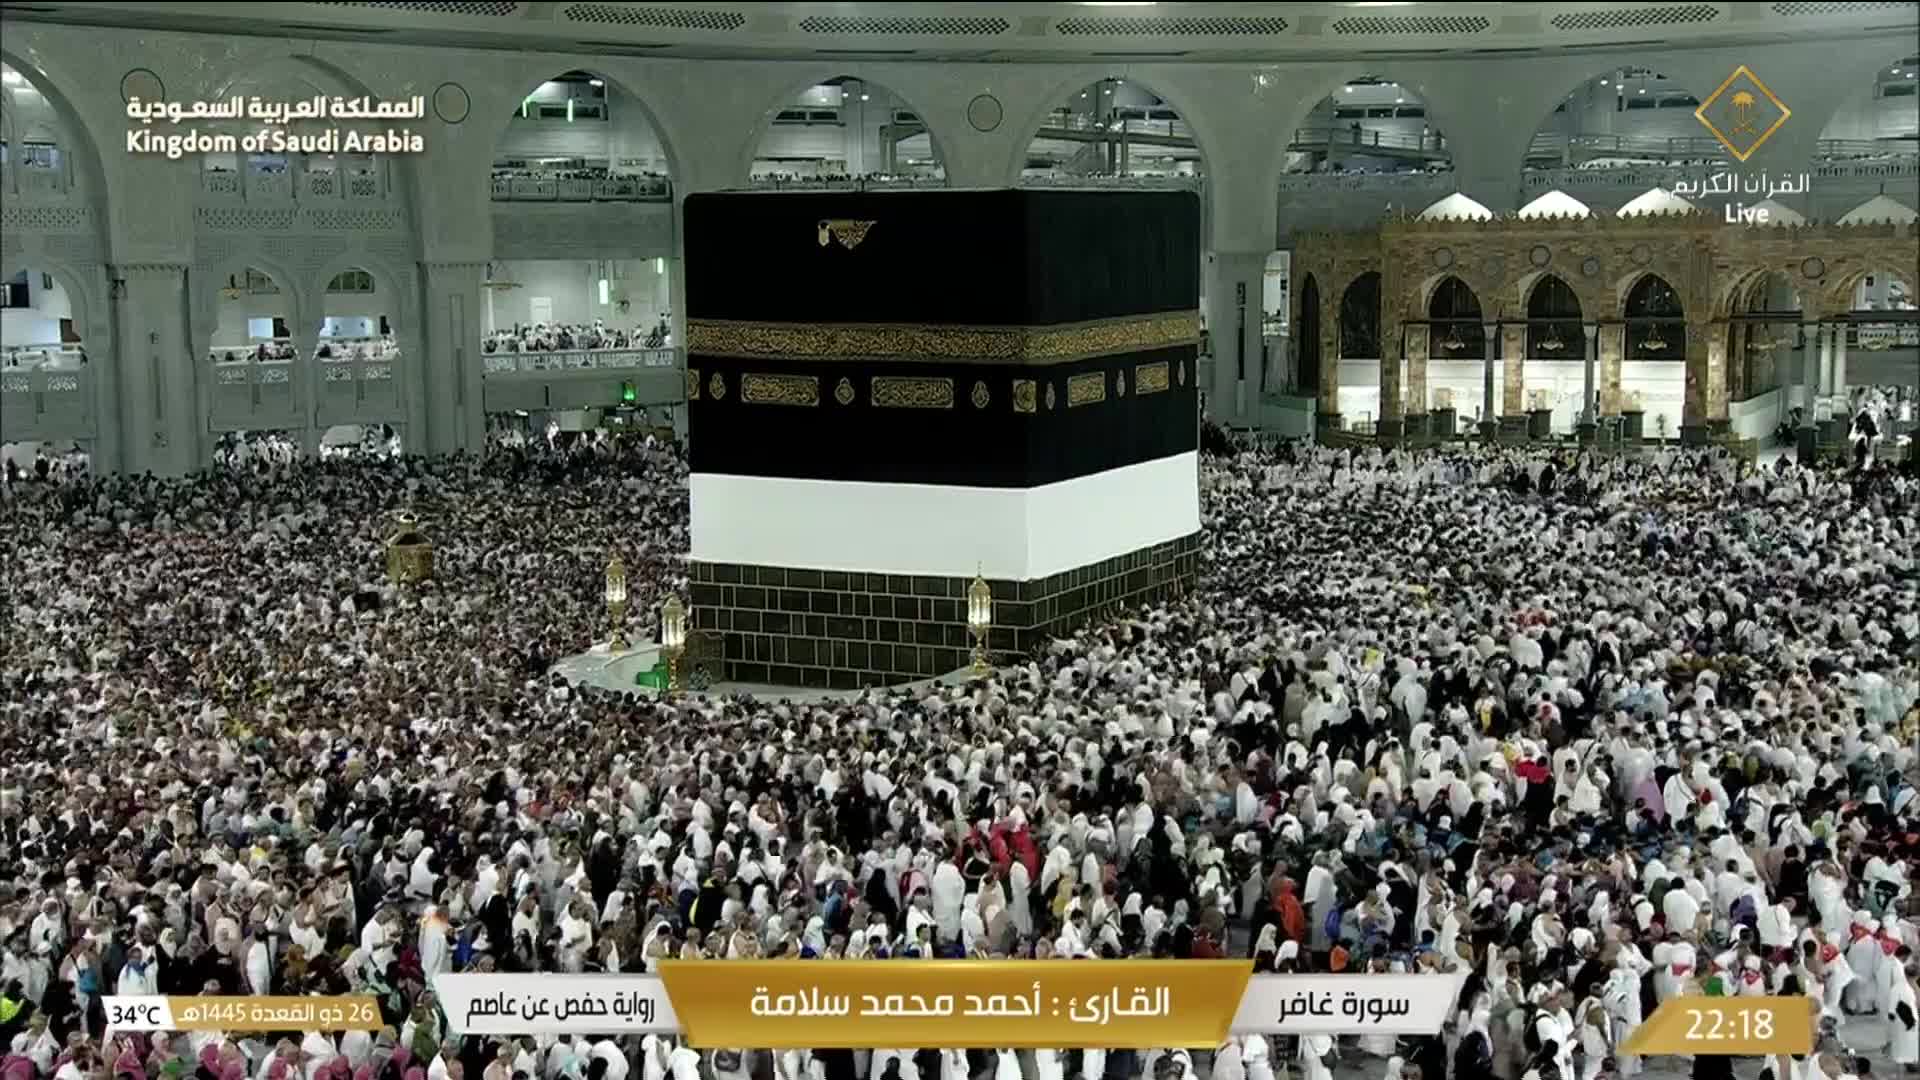 Mecca Wed. 22:36